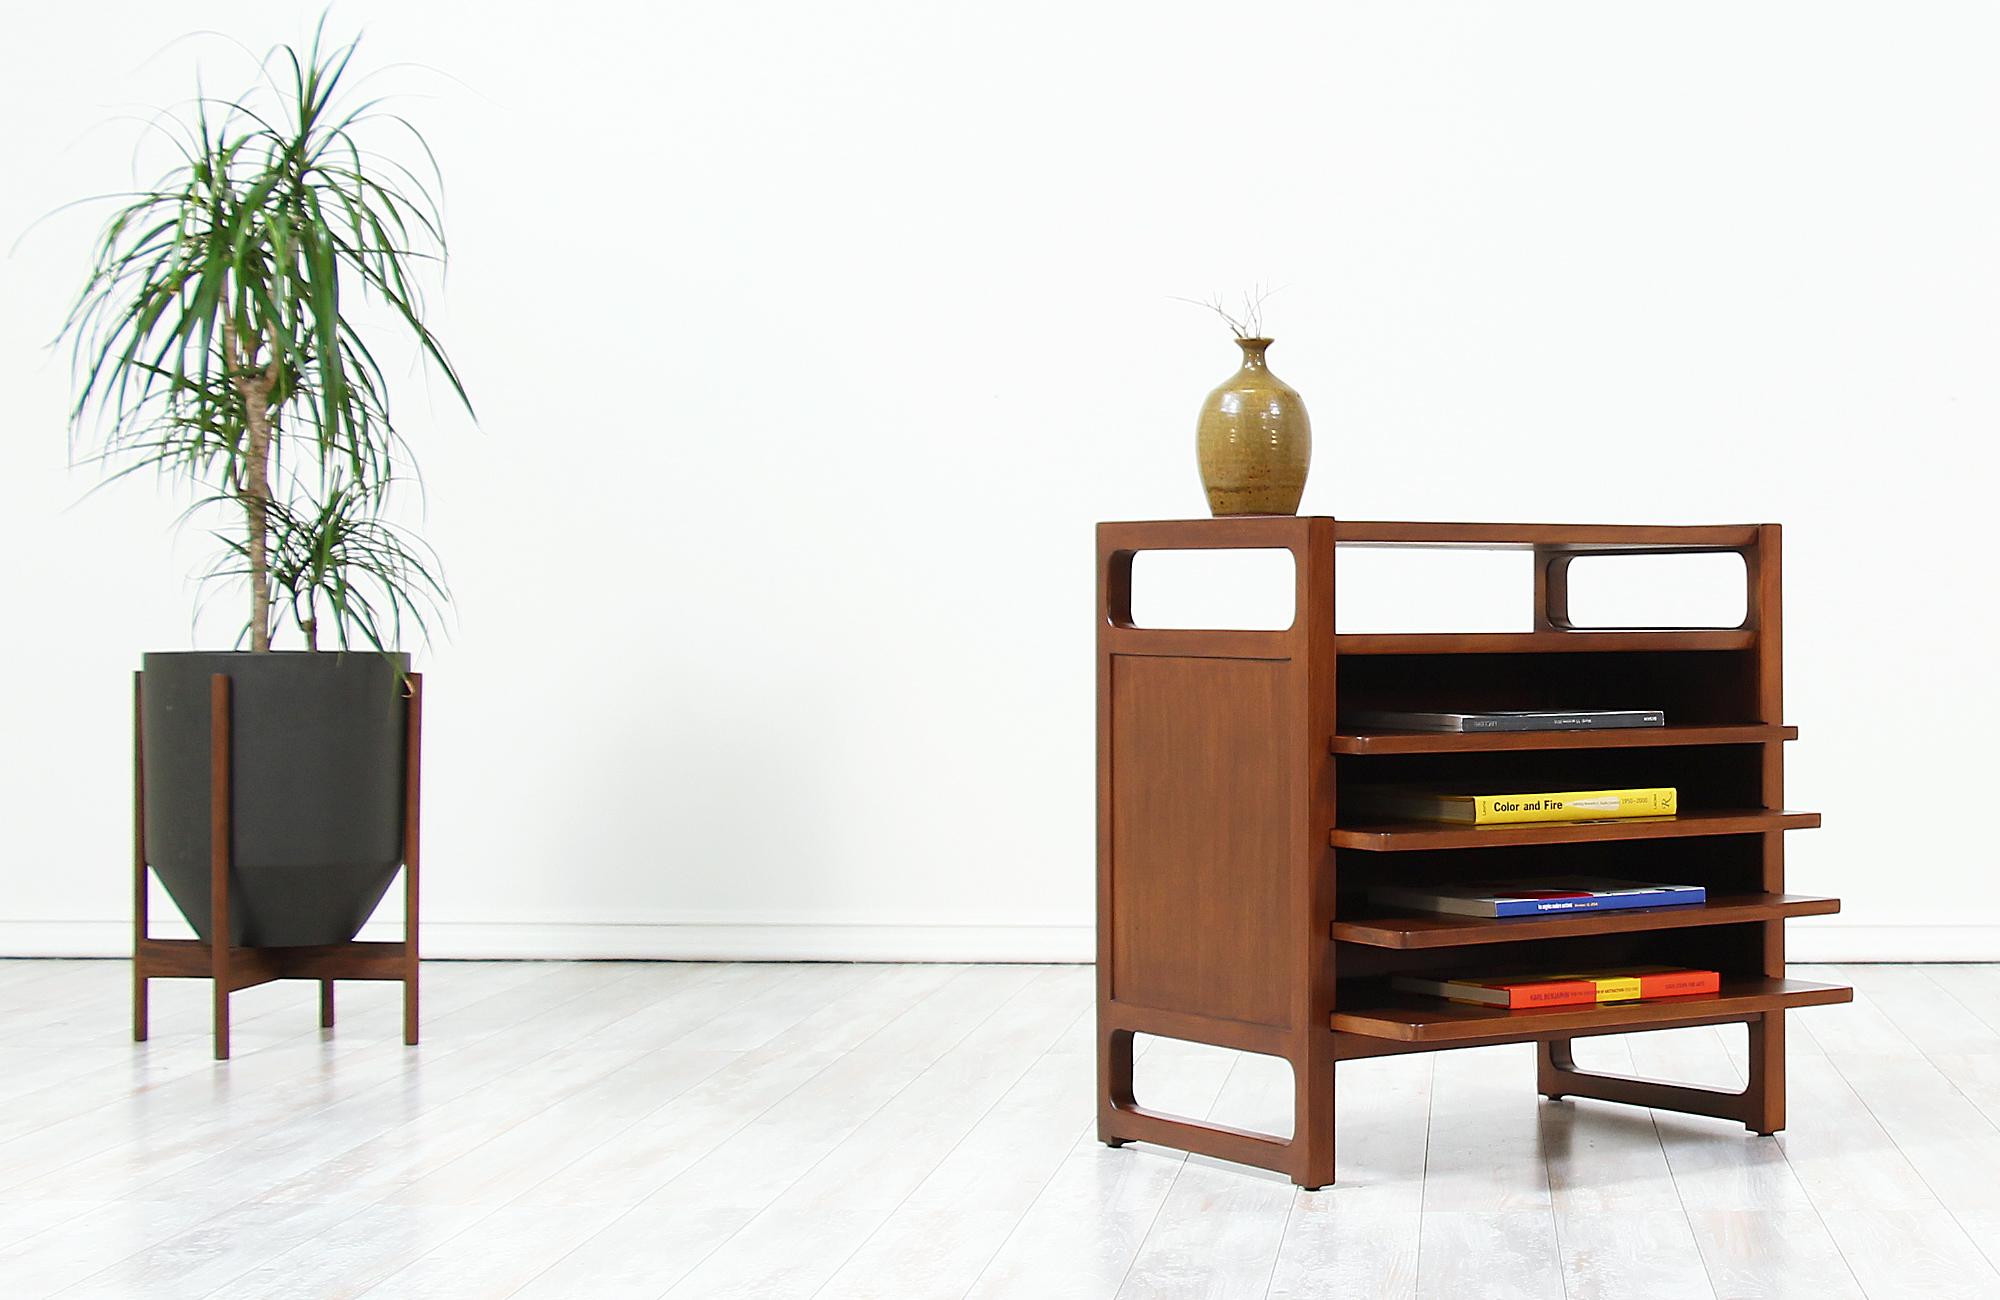 Gorgeous magazine table designed by Edward J. Wormley for Drexel’s “Precedent” line in the United States circa 1940s. This unique table features a solid walnut-stained beech wood frame with four sliding shelves that slide smoothly for optimal